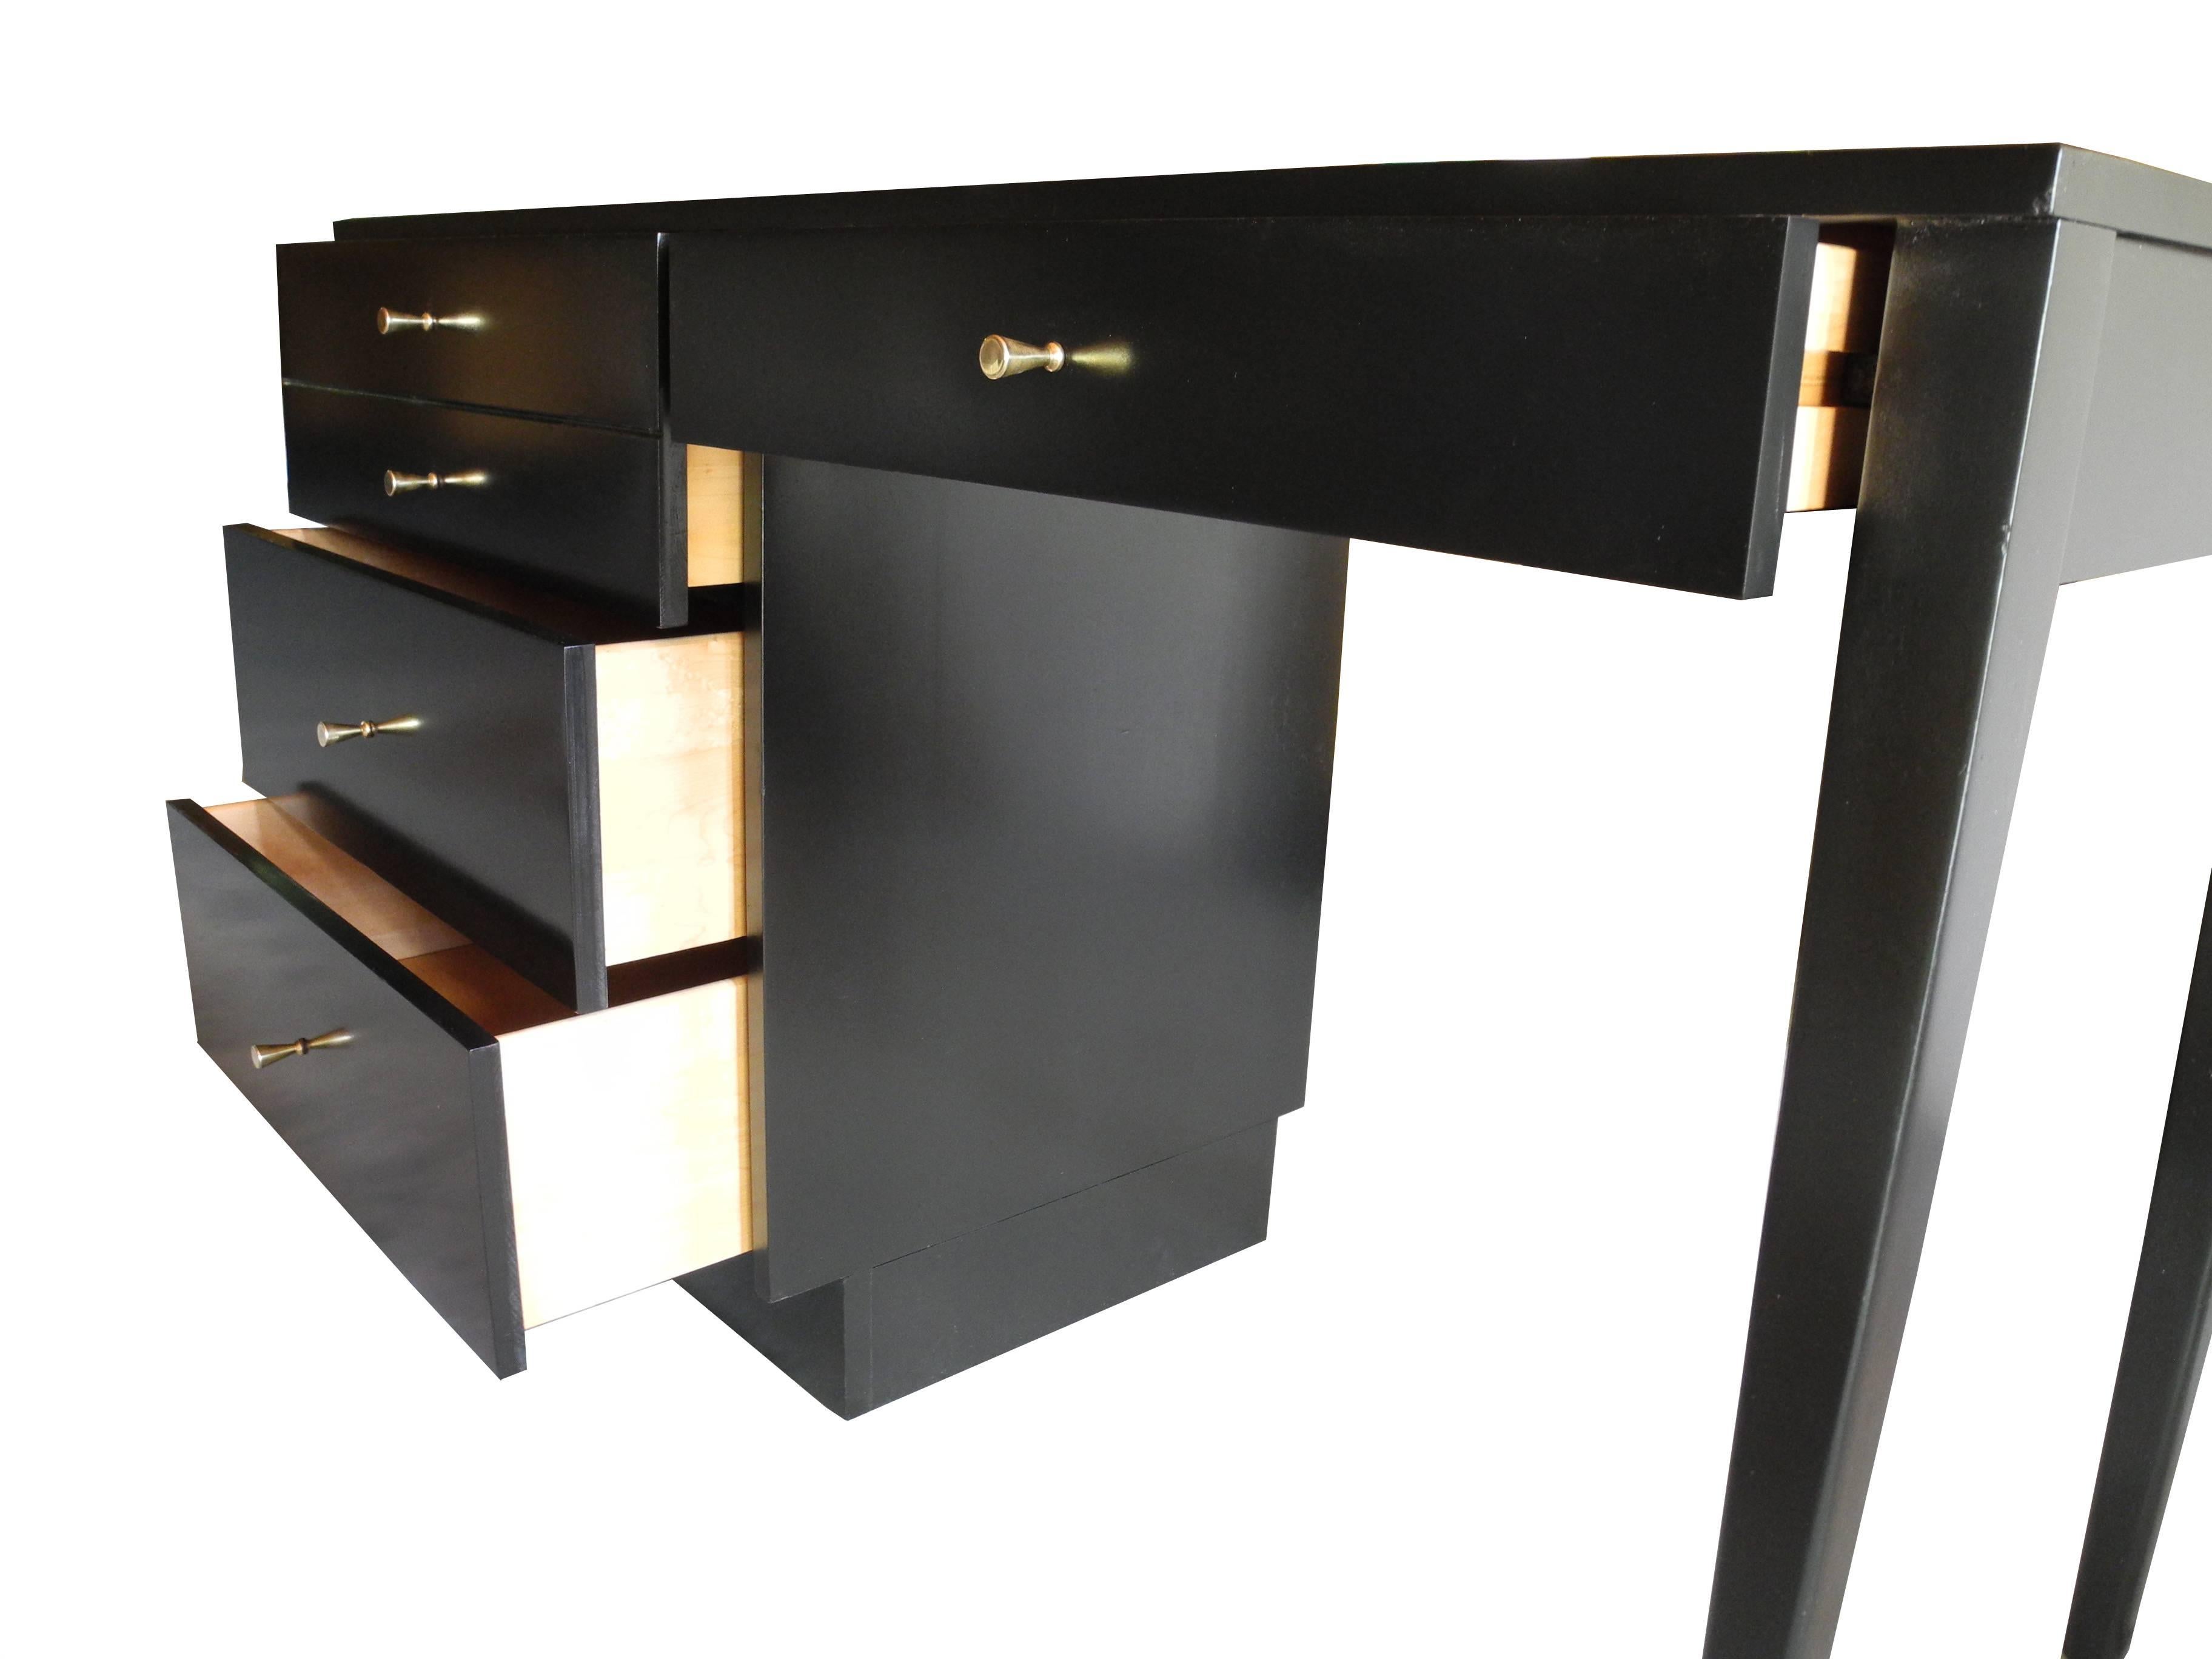 20th Century Mid-Century American Modern Black Maple Desk and Drawers by Paul McCobb For Sale